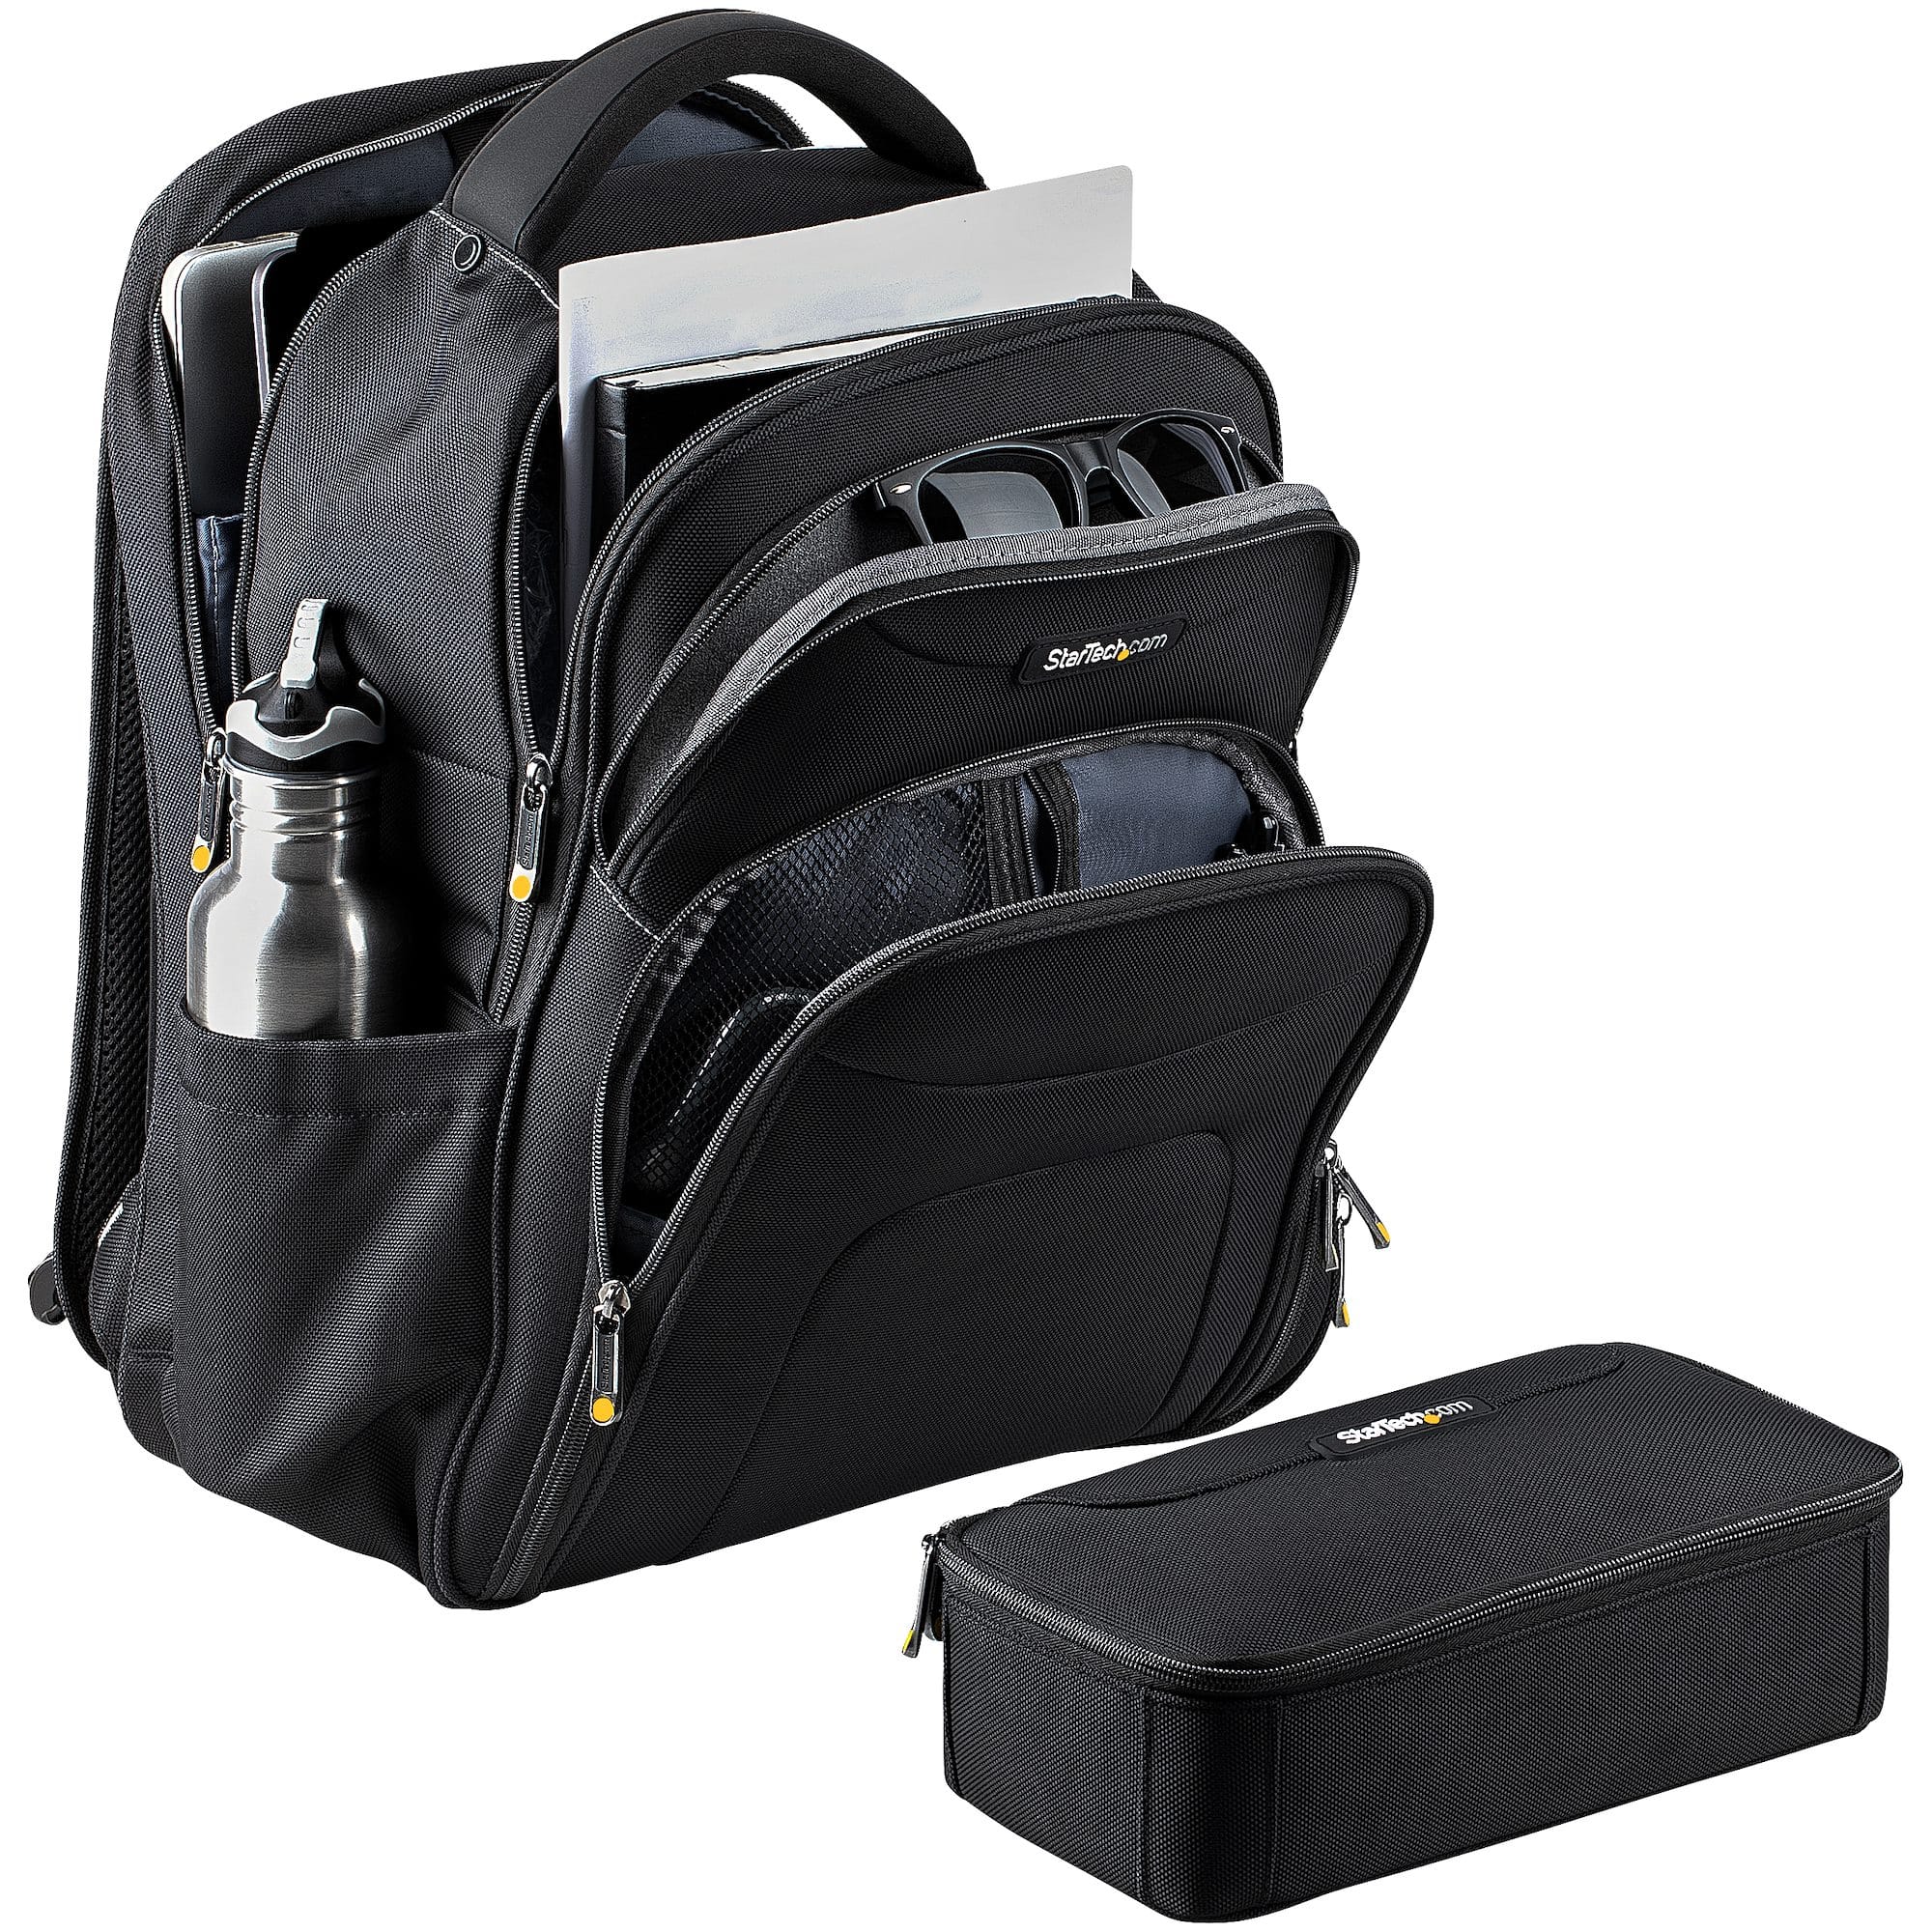 StarTech.com launches laptop backpack for commuters, travelers, and IT ...